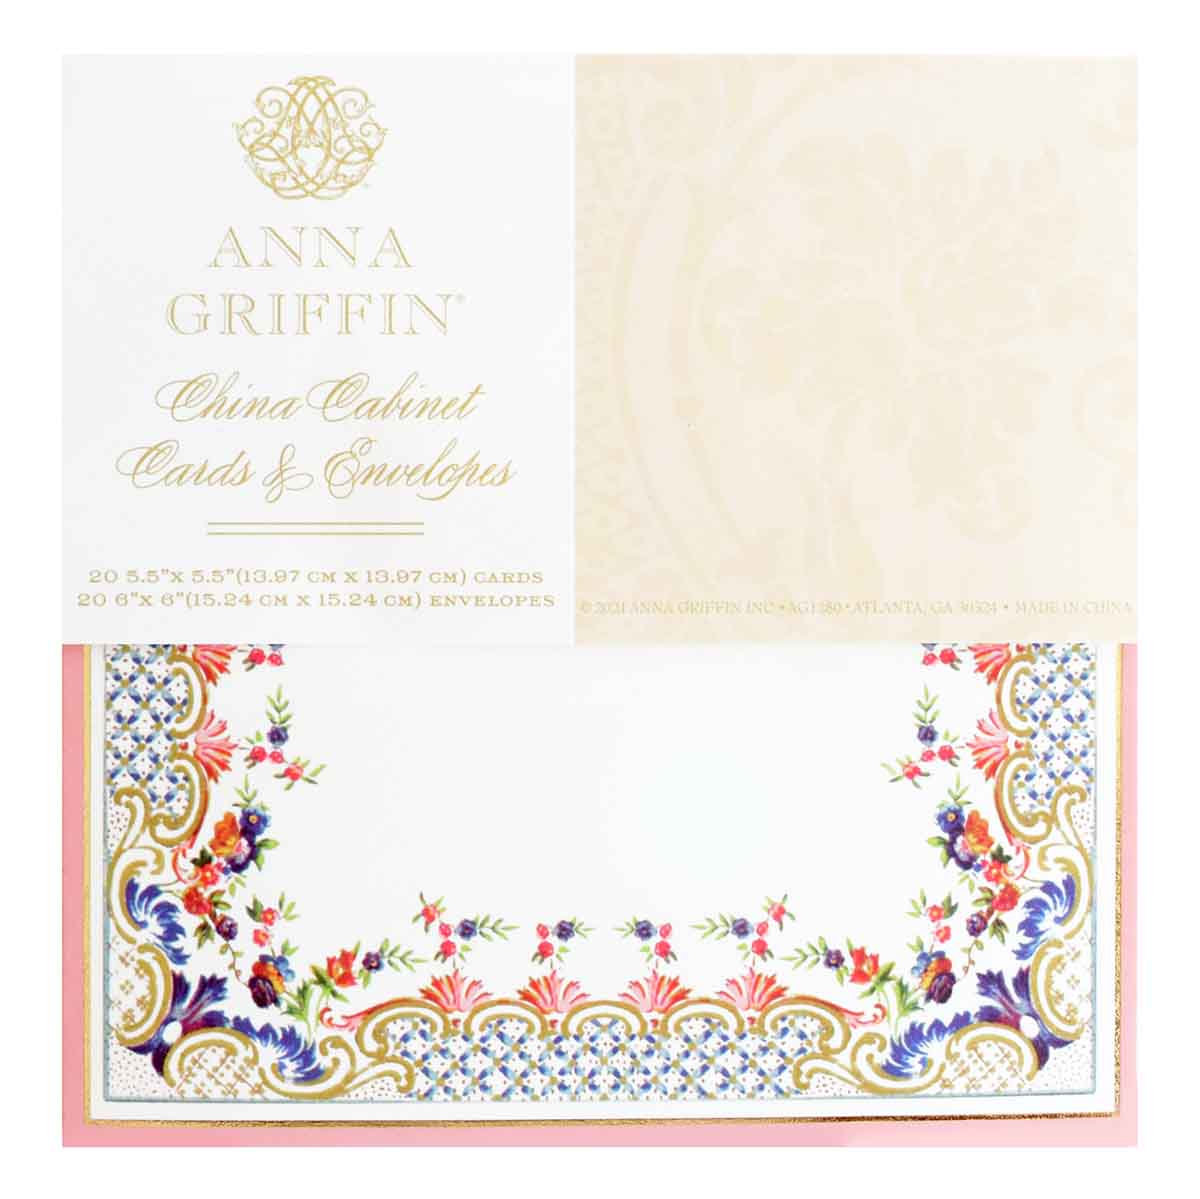 Anna Griffin China Cabinet School Supplies Craft Box - Graduation Card,  Thank You Card, Birthday Card Making Supplies for Adults - Homemade Card  Making Kits for Adults - Makes 20 Finished Cards